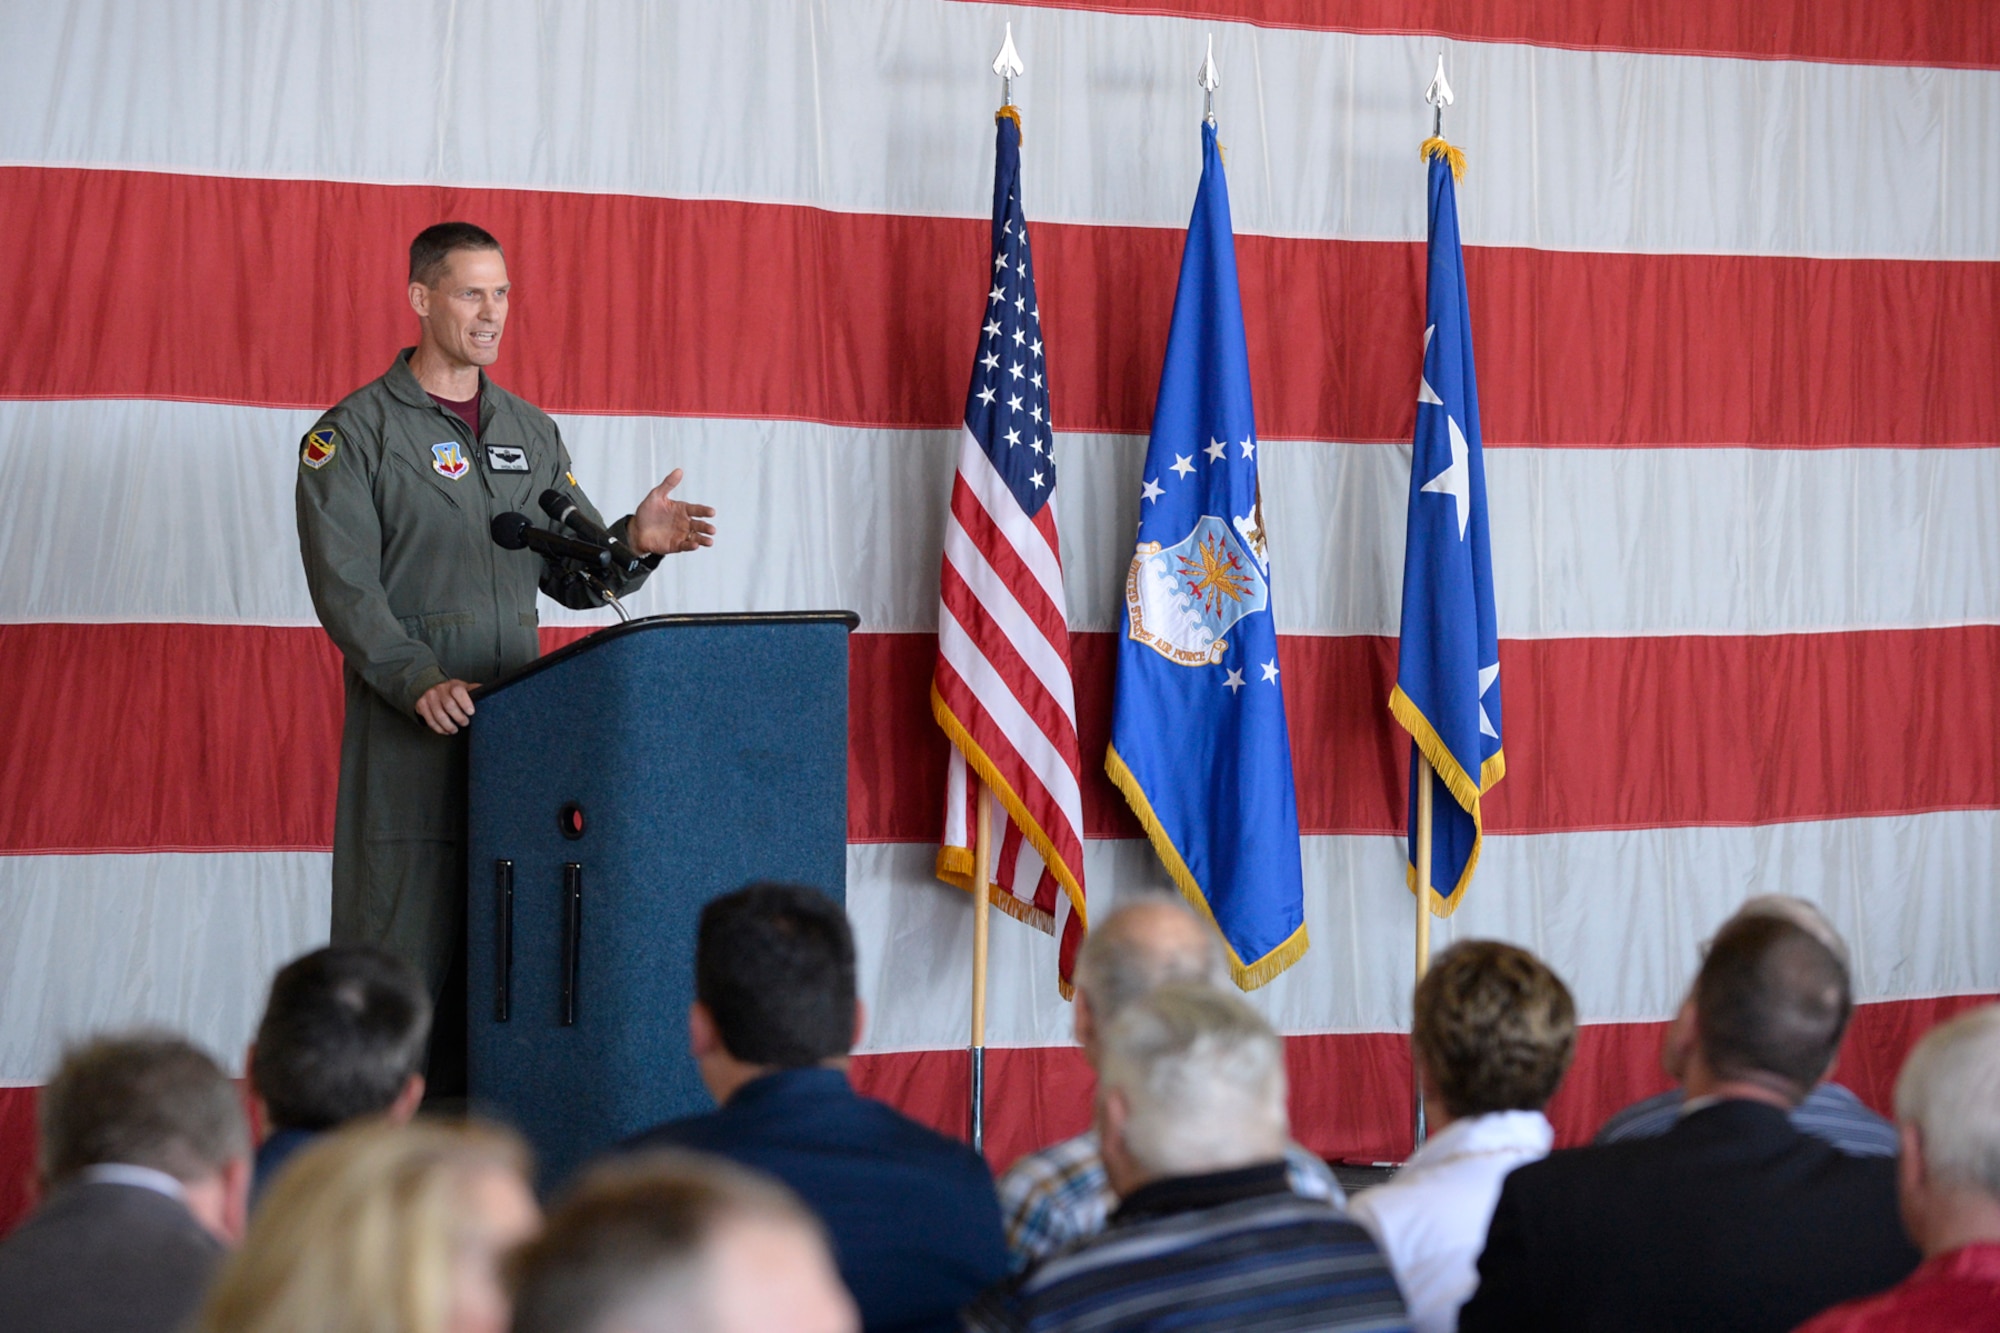 Col. Lee E. Kloos, 388th Fighter Wing commander, addresses guests at the Viper Out ceremony, a farewell to the F-16, Sept. 8, 2017, at Hill Air Force Base, Utah.